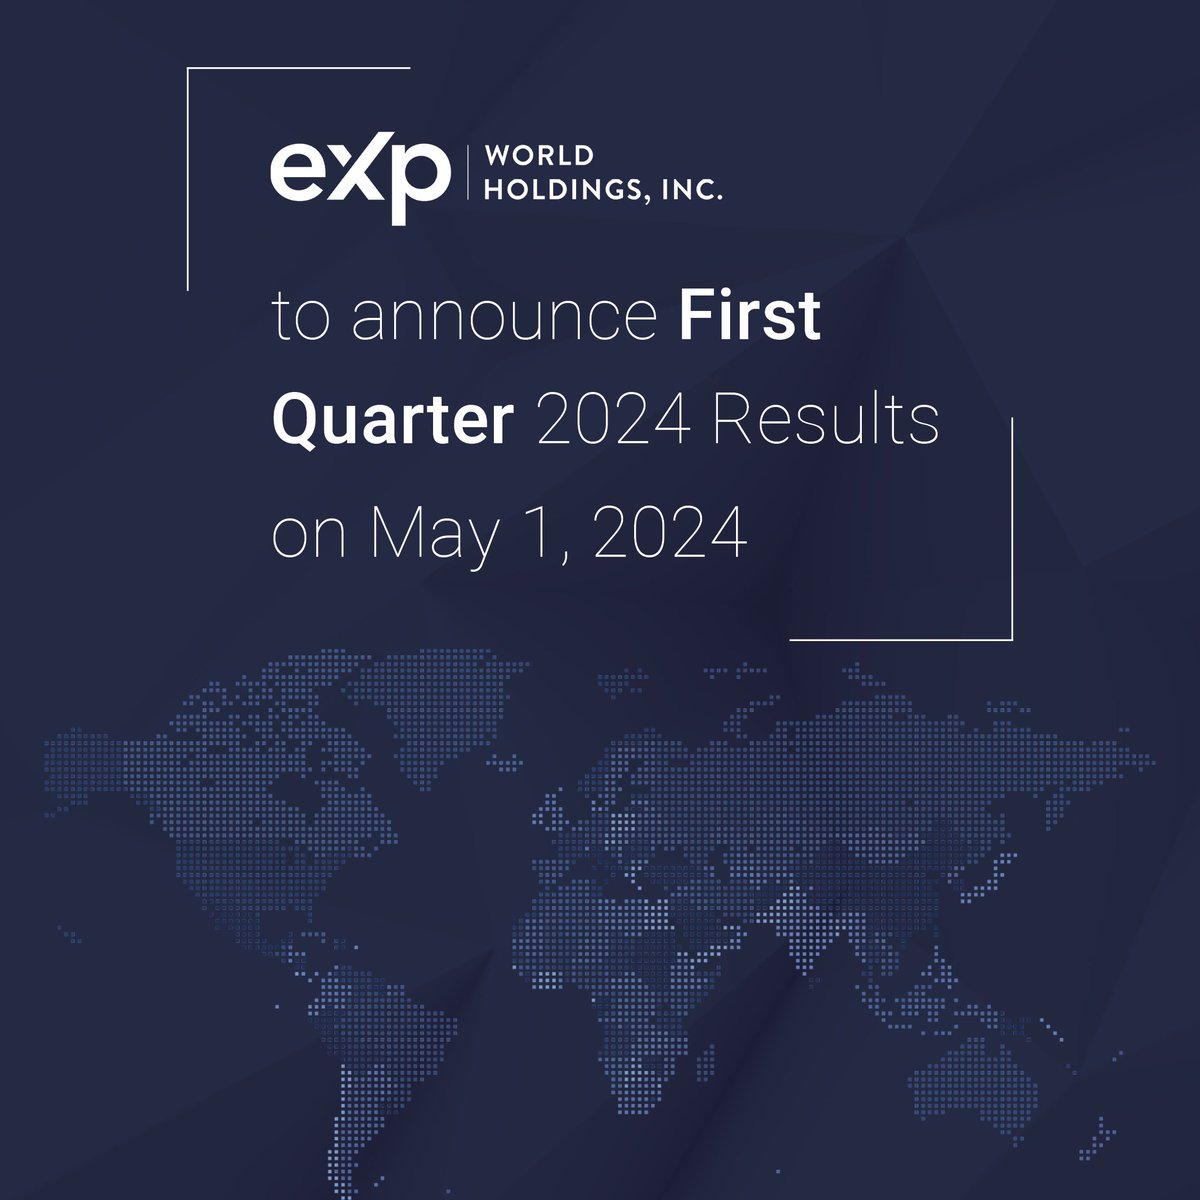 eXp World Holdings to Announce First Quarter 2024 Results on May 1, 2024 🔔 Join us for a virtual fireside chat and investor Q&A: 🗓️ May 1, 2024 🕐2 p.m. PT / 5 p.m. ET 🌎exp.world/earnings More: ow.ly/PuM350RislX $EXPI